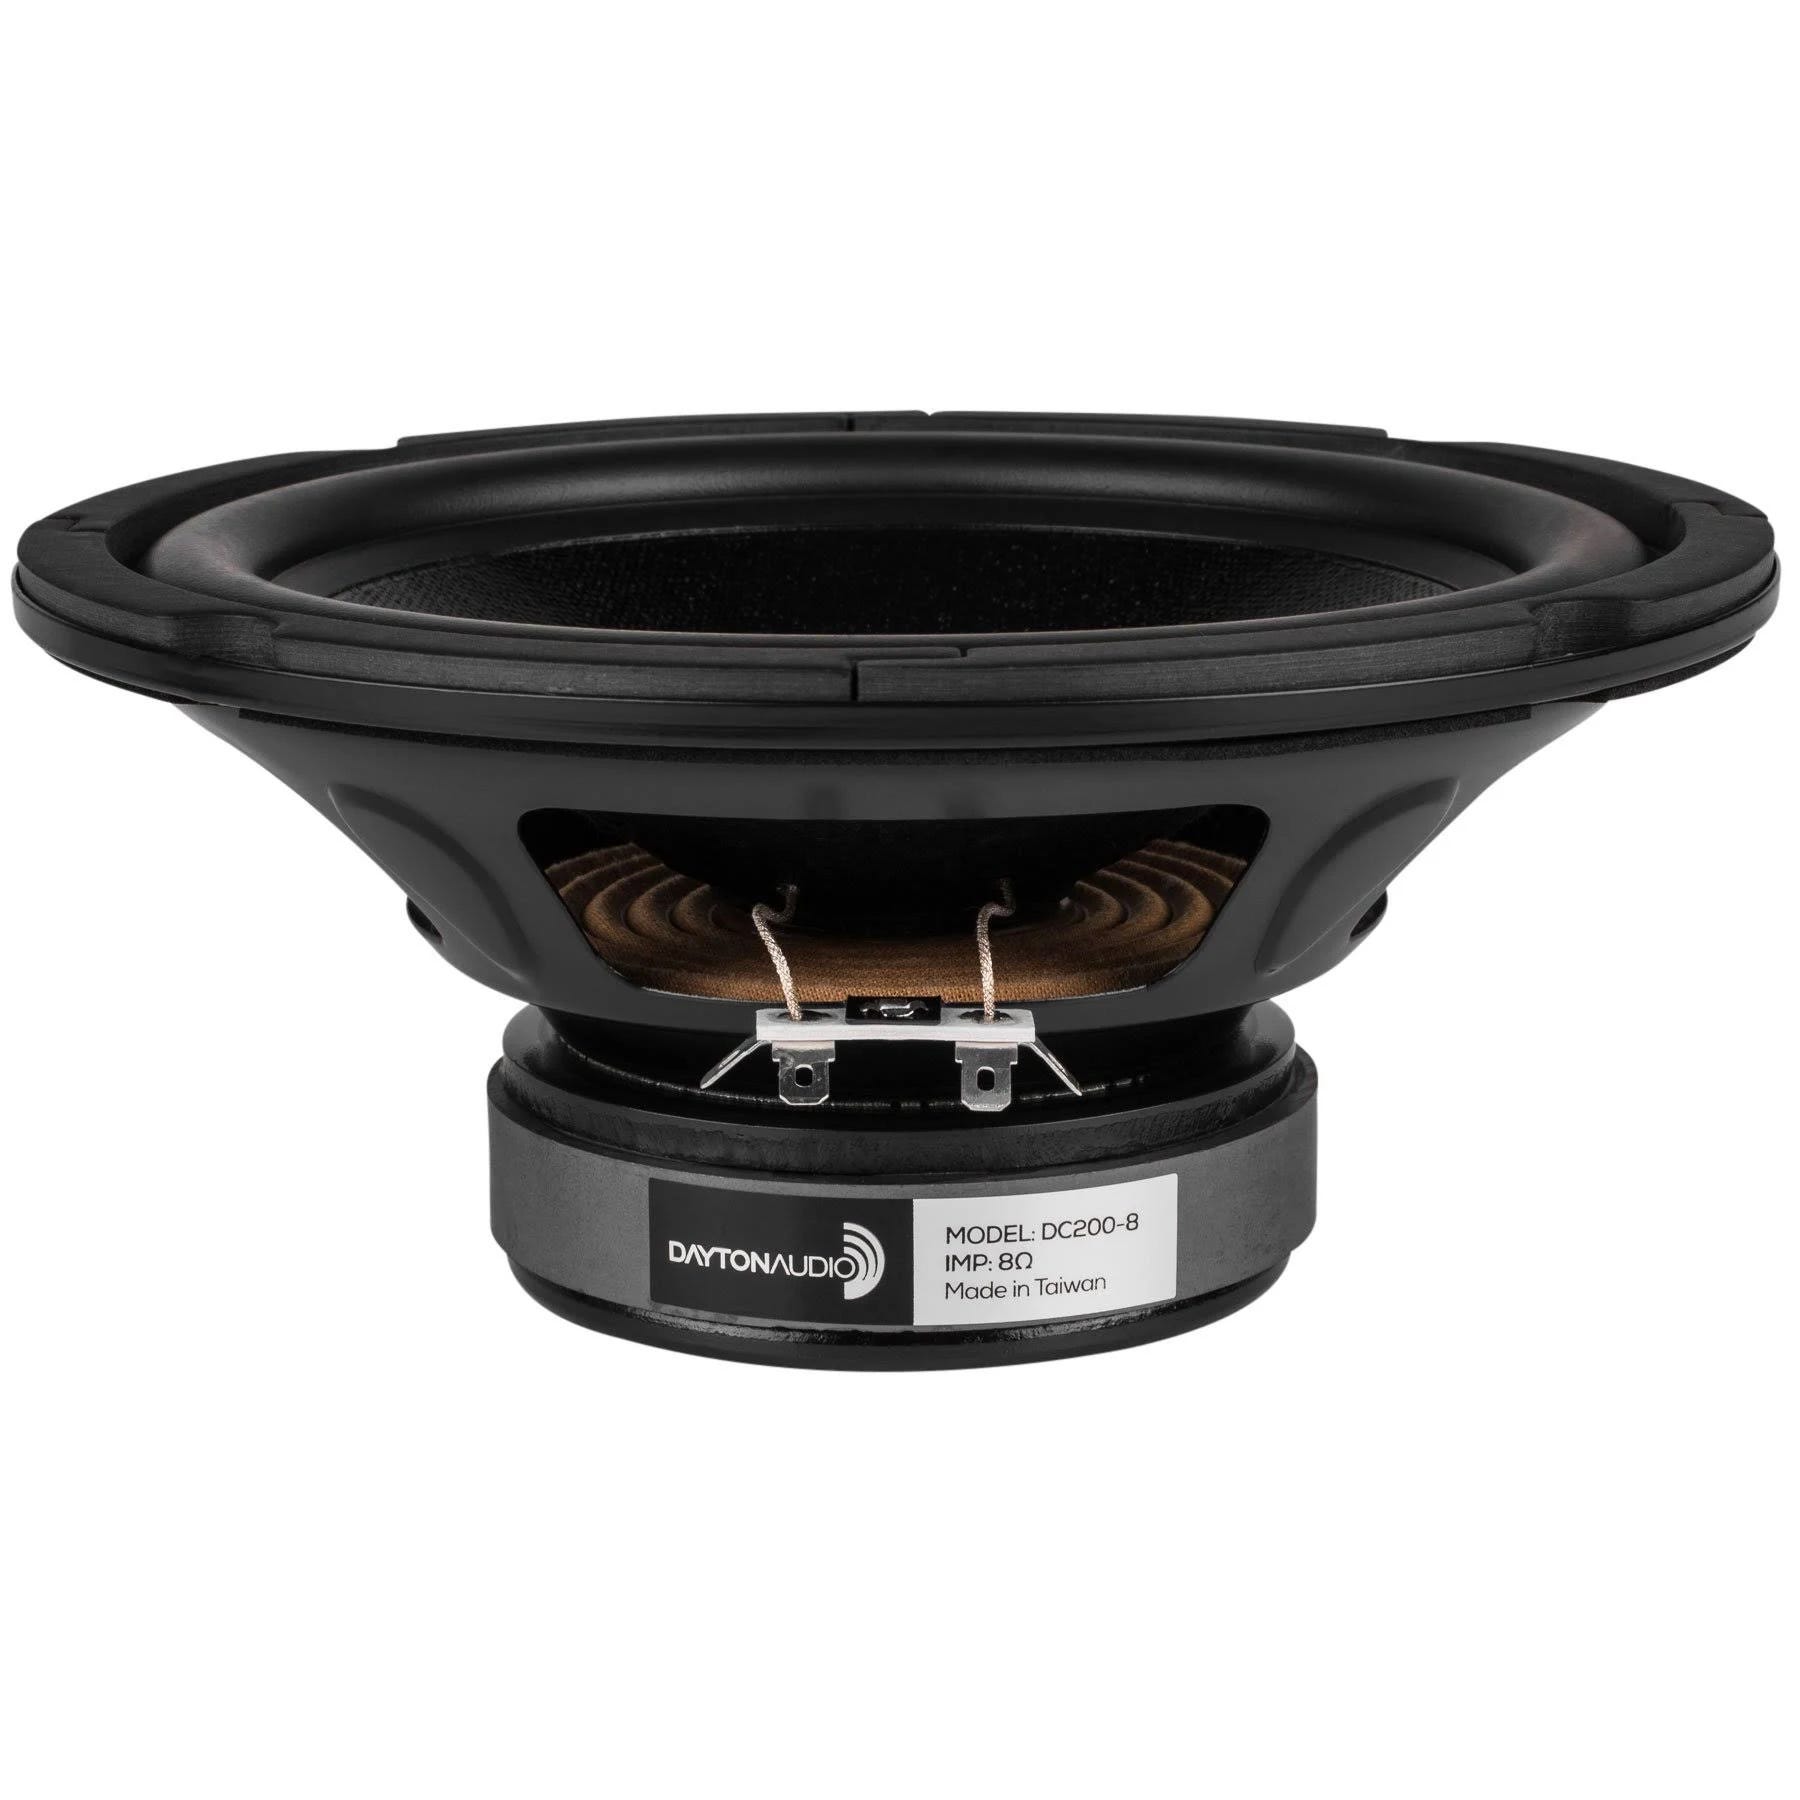 Dayton Audio DC200-8 Classic Woofer: Corrosion-Resistant, High Performance 8 Inch Subwoofer | Image